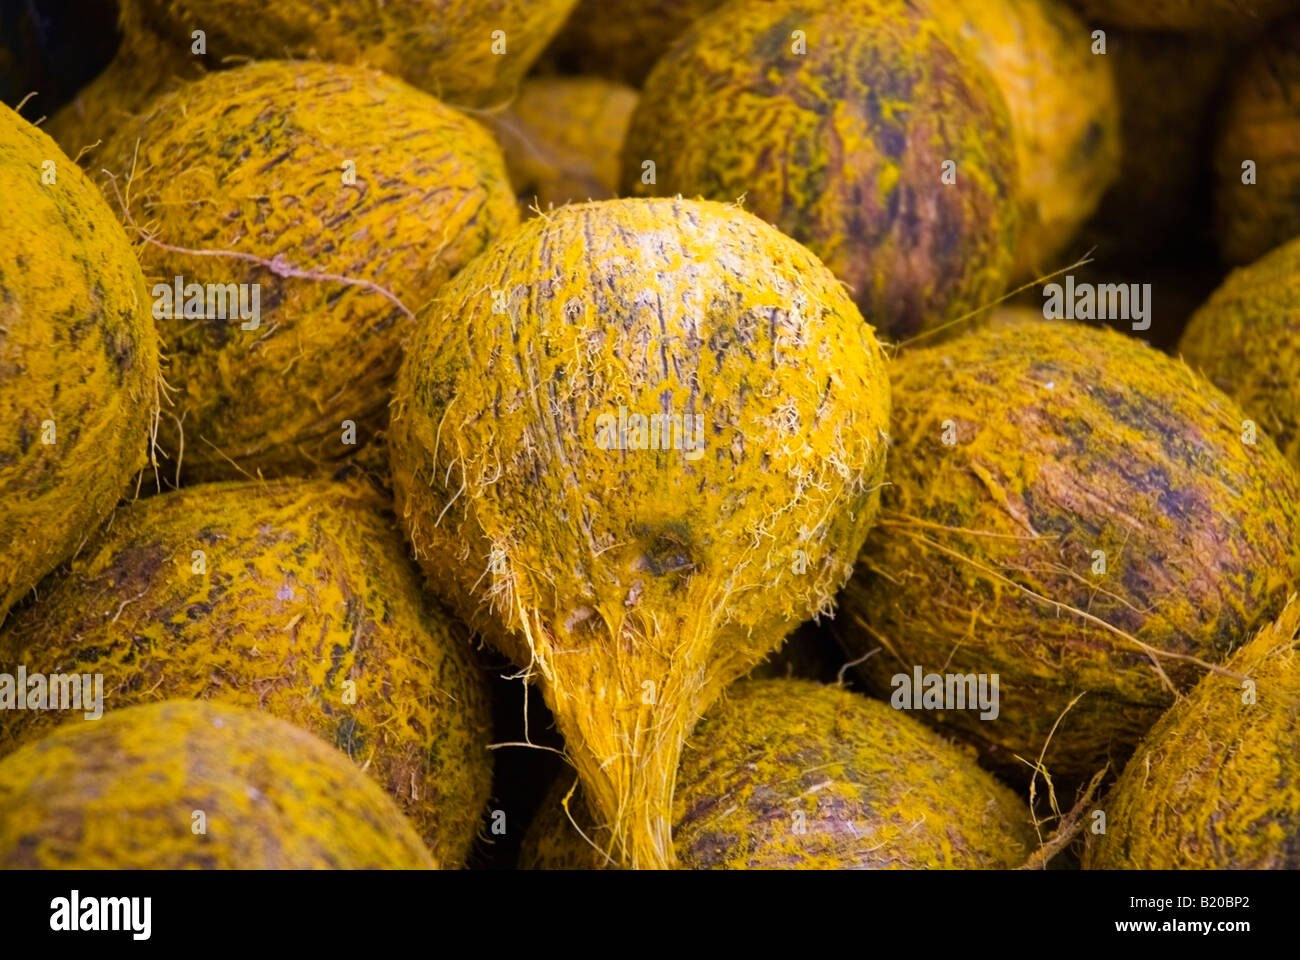 Coconuts on a Market stall in Singapore Stock Photo